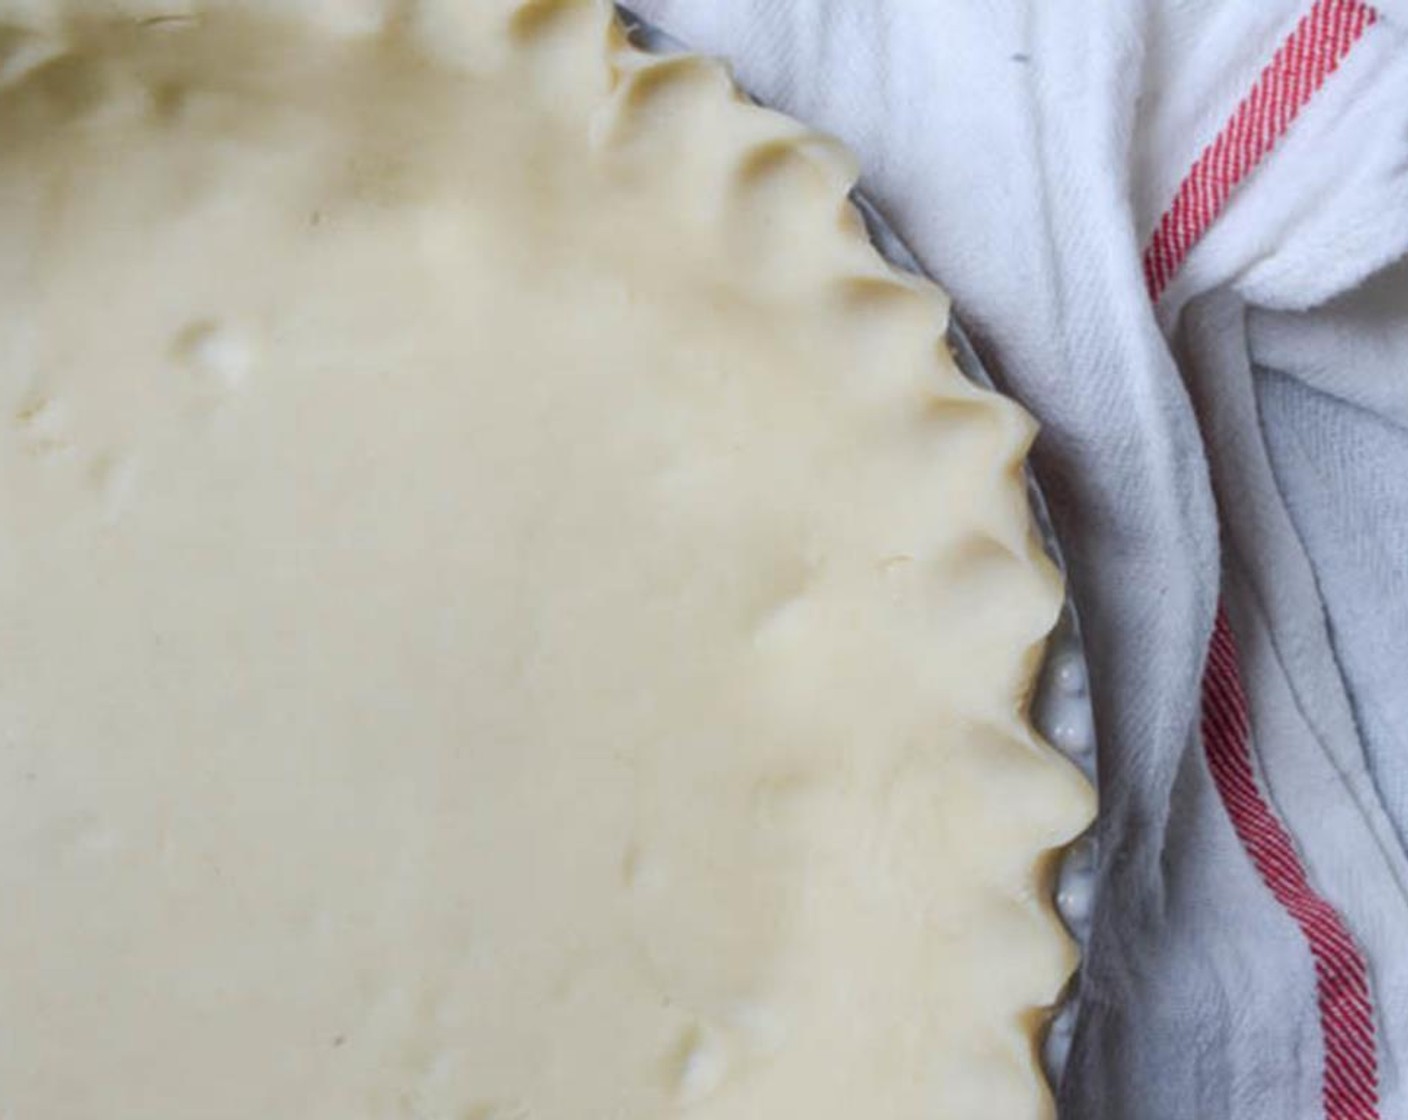 step 2 Arrange the 9-inch Pie Crust (1) in a pie pan, pressing firmly on the bottom and sides of the pan. Fold any overhanging edges of the pastry under itself and using your fingers or the tines of a fork, press the edges to form a decorative rim.